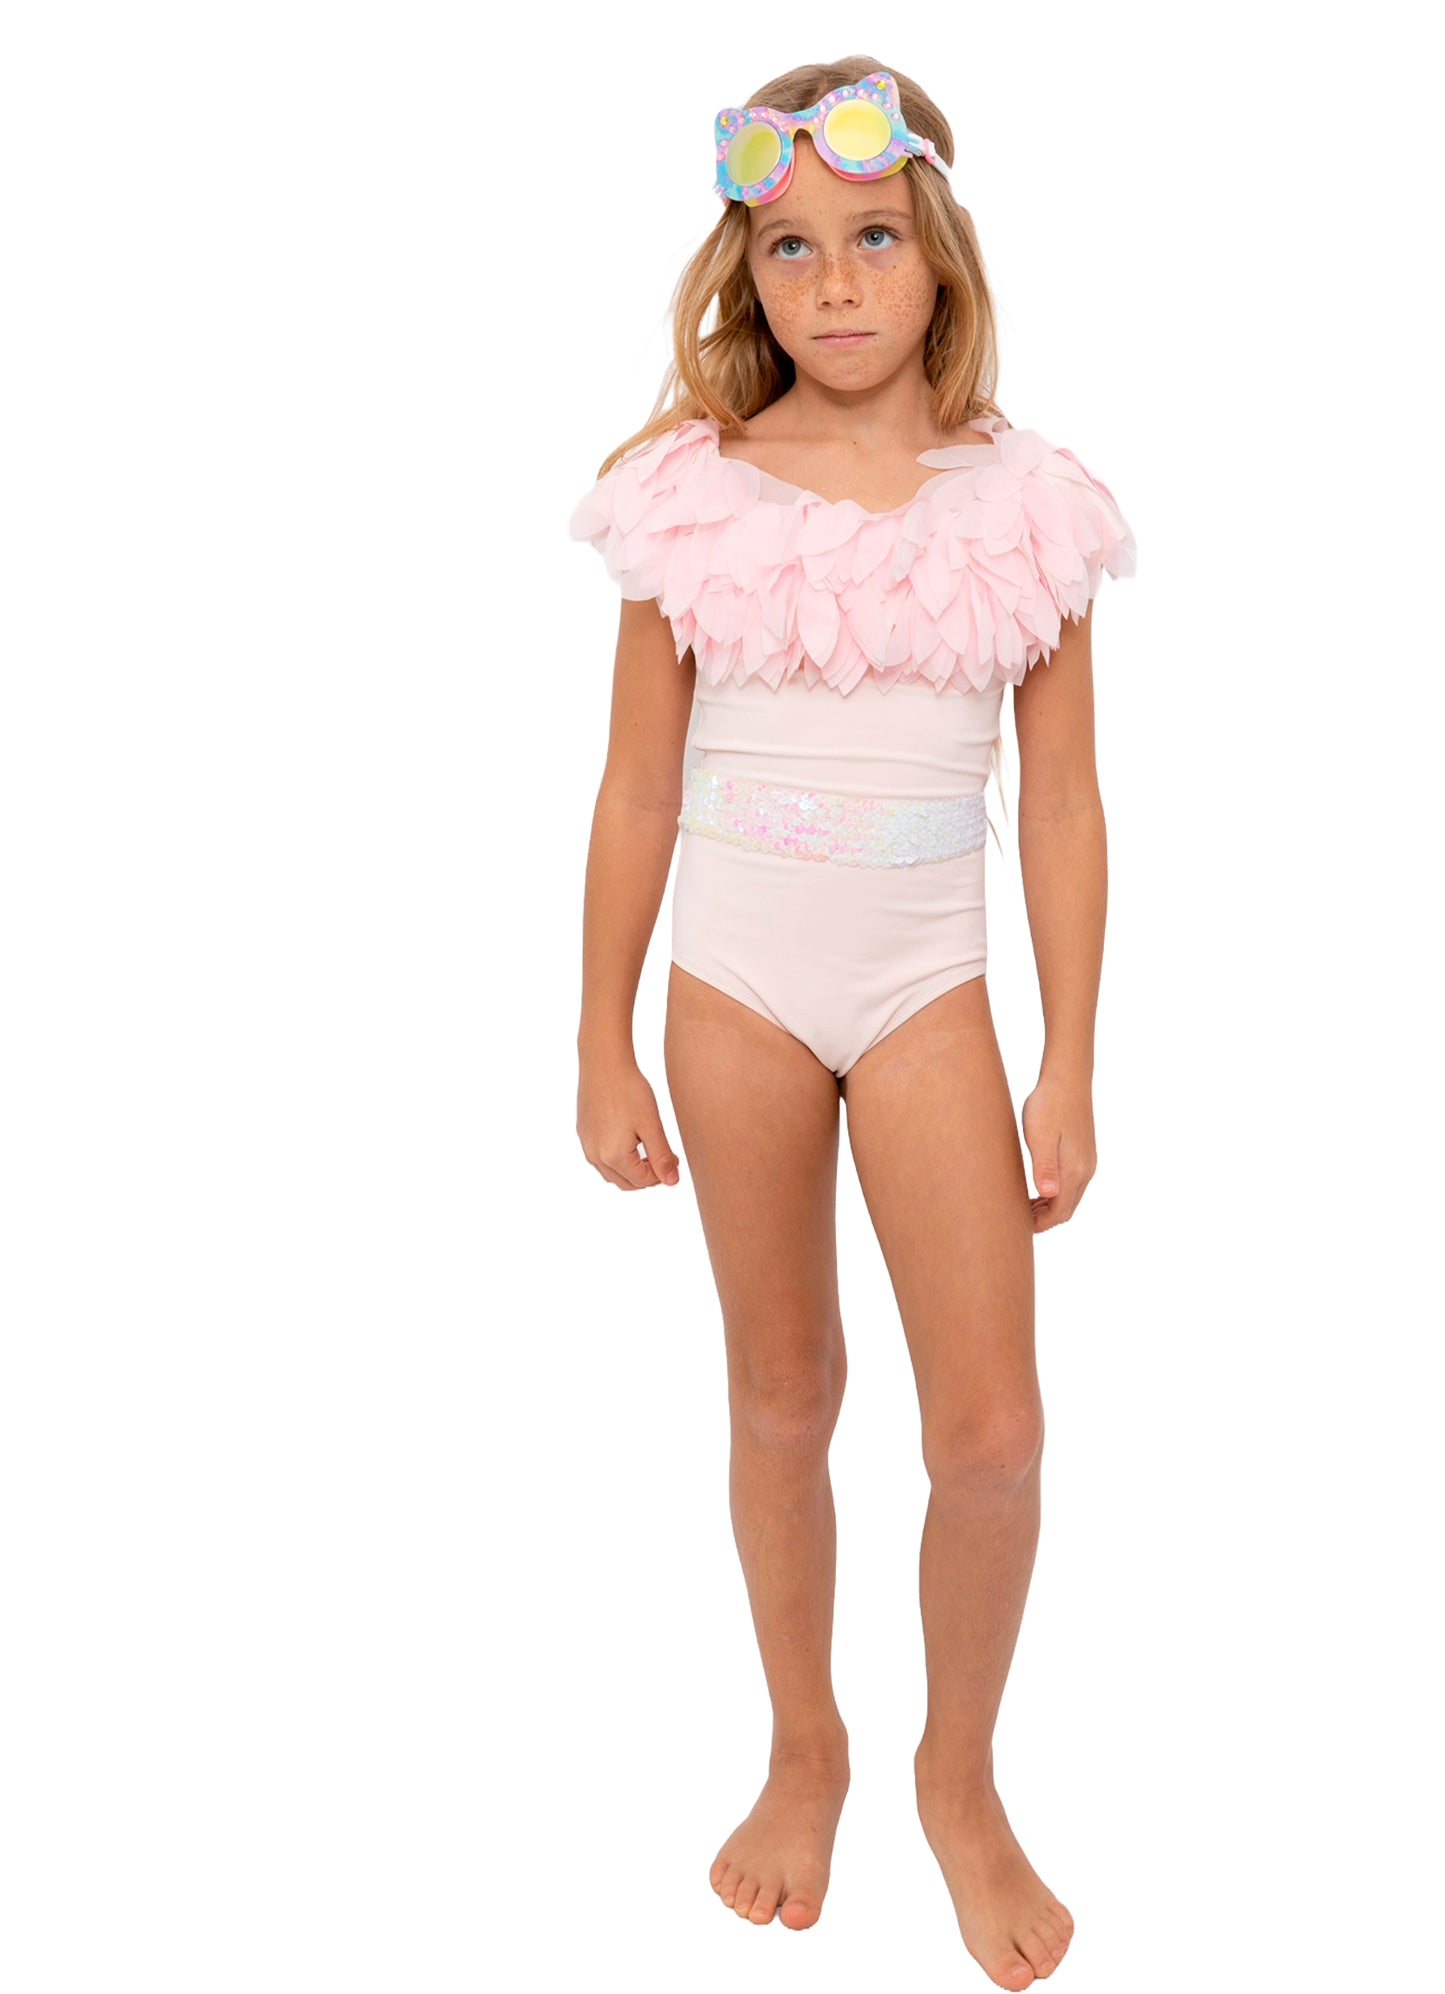 swimwear for girls, pink swimsuit for girls, pink bathing suits for girls